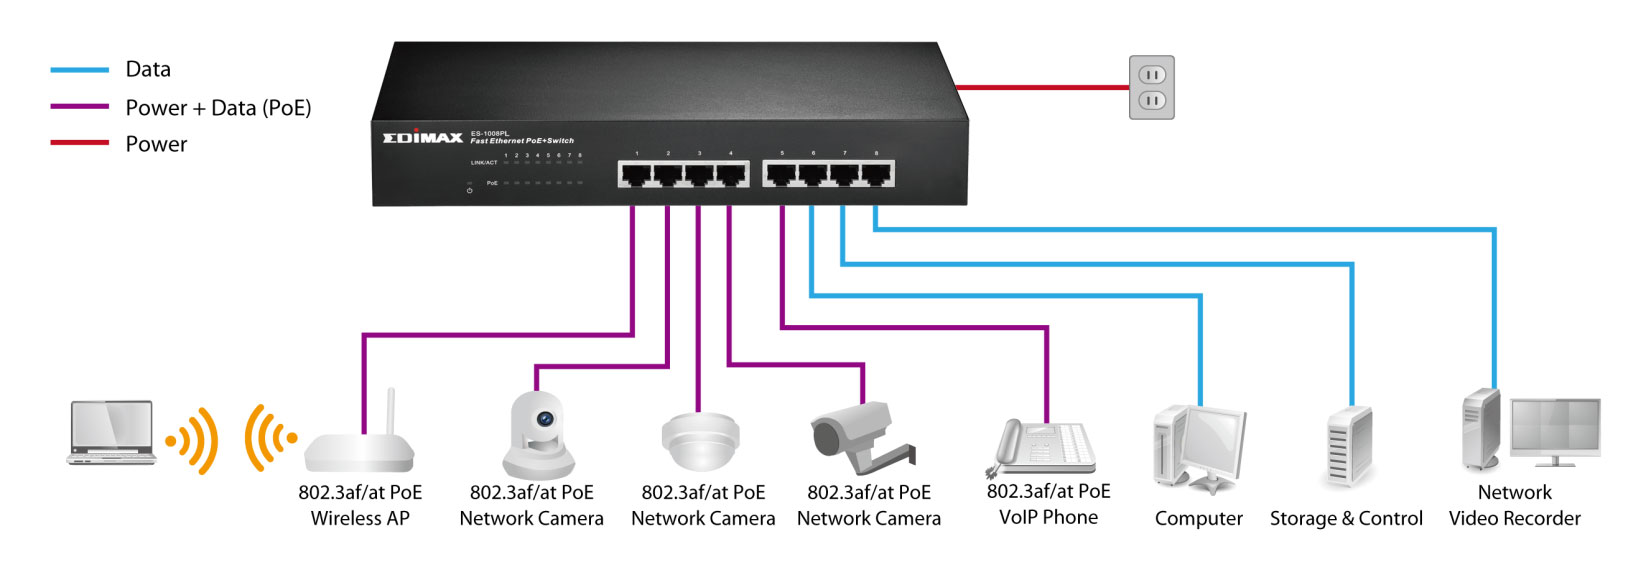 Ethernet Poe Wiring Diagram from radioparts.com.au